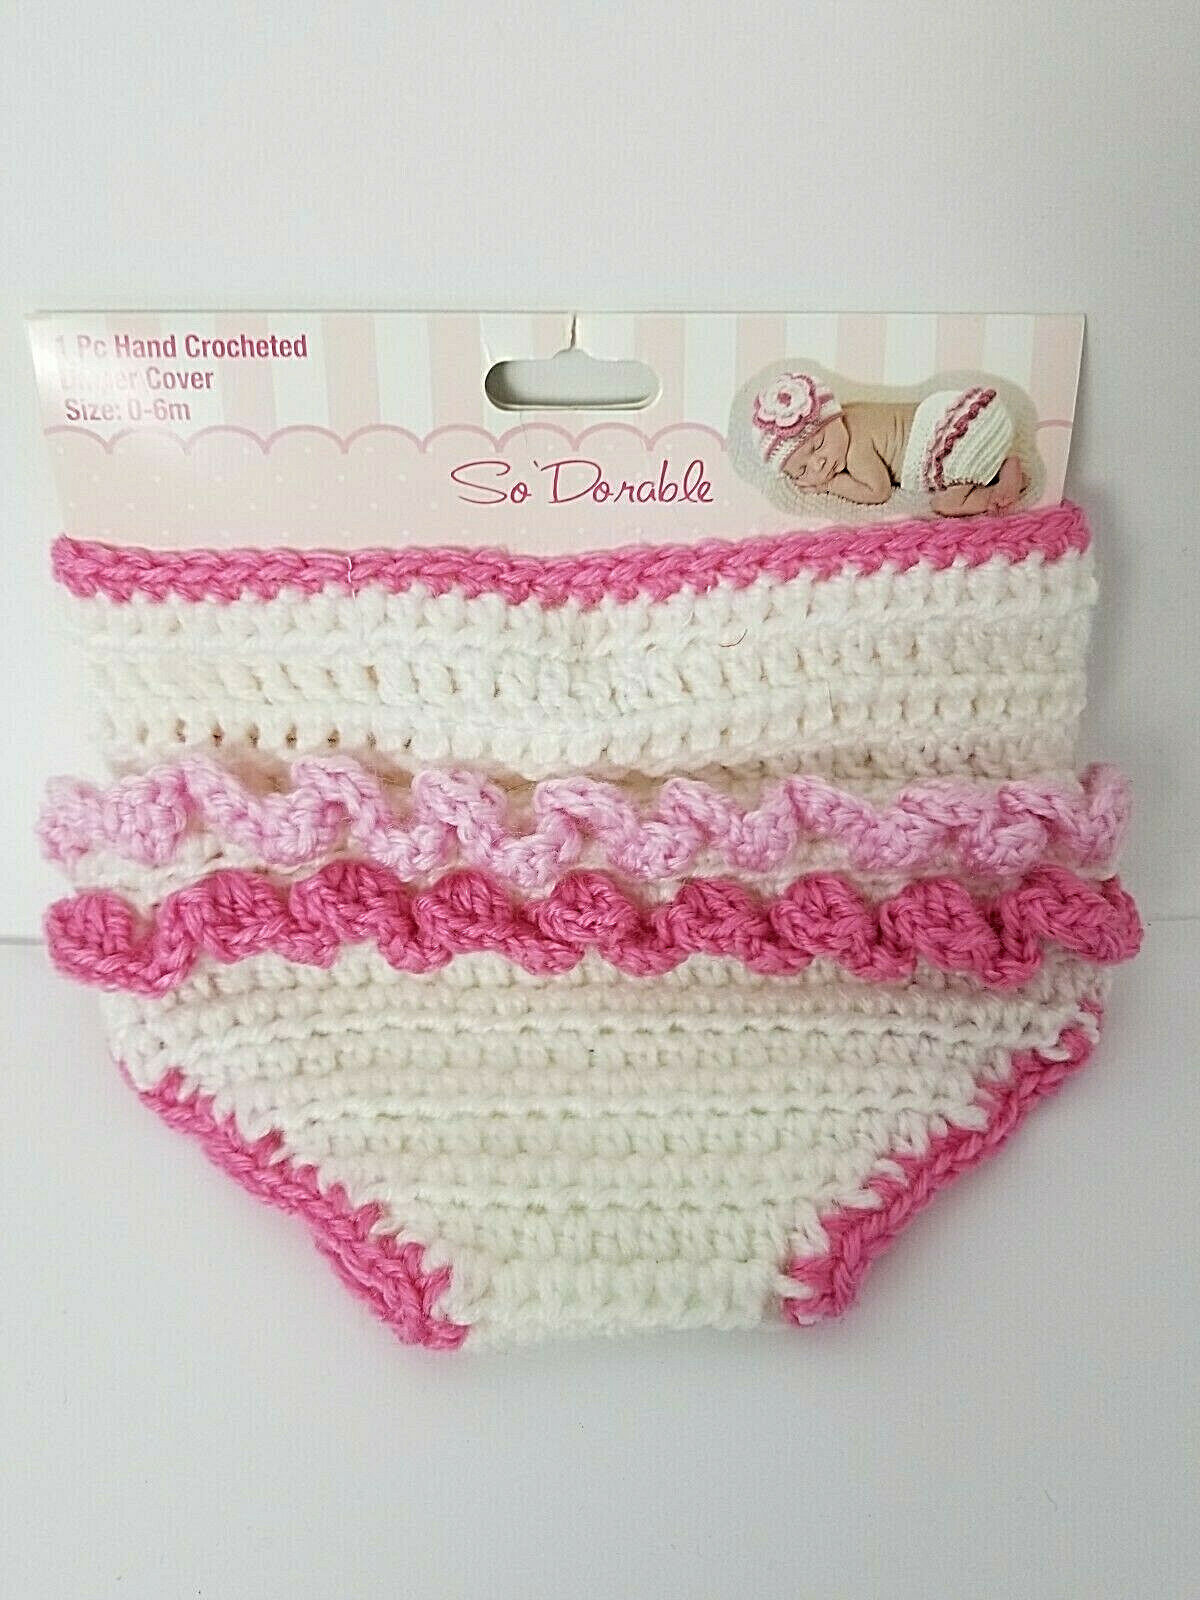 So Dorable Diaper Cover 0-6 Months Baby Girl Crocheted New